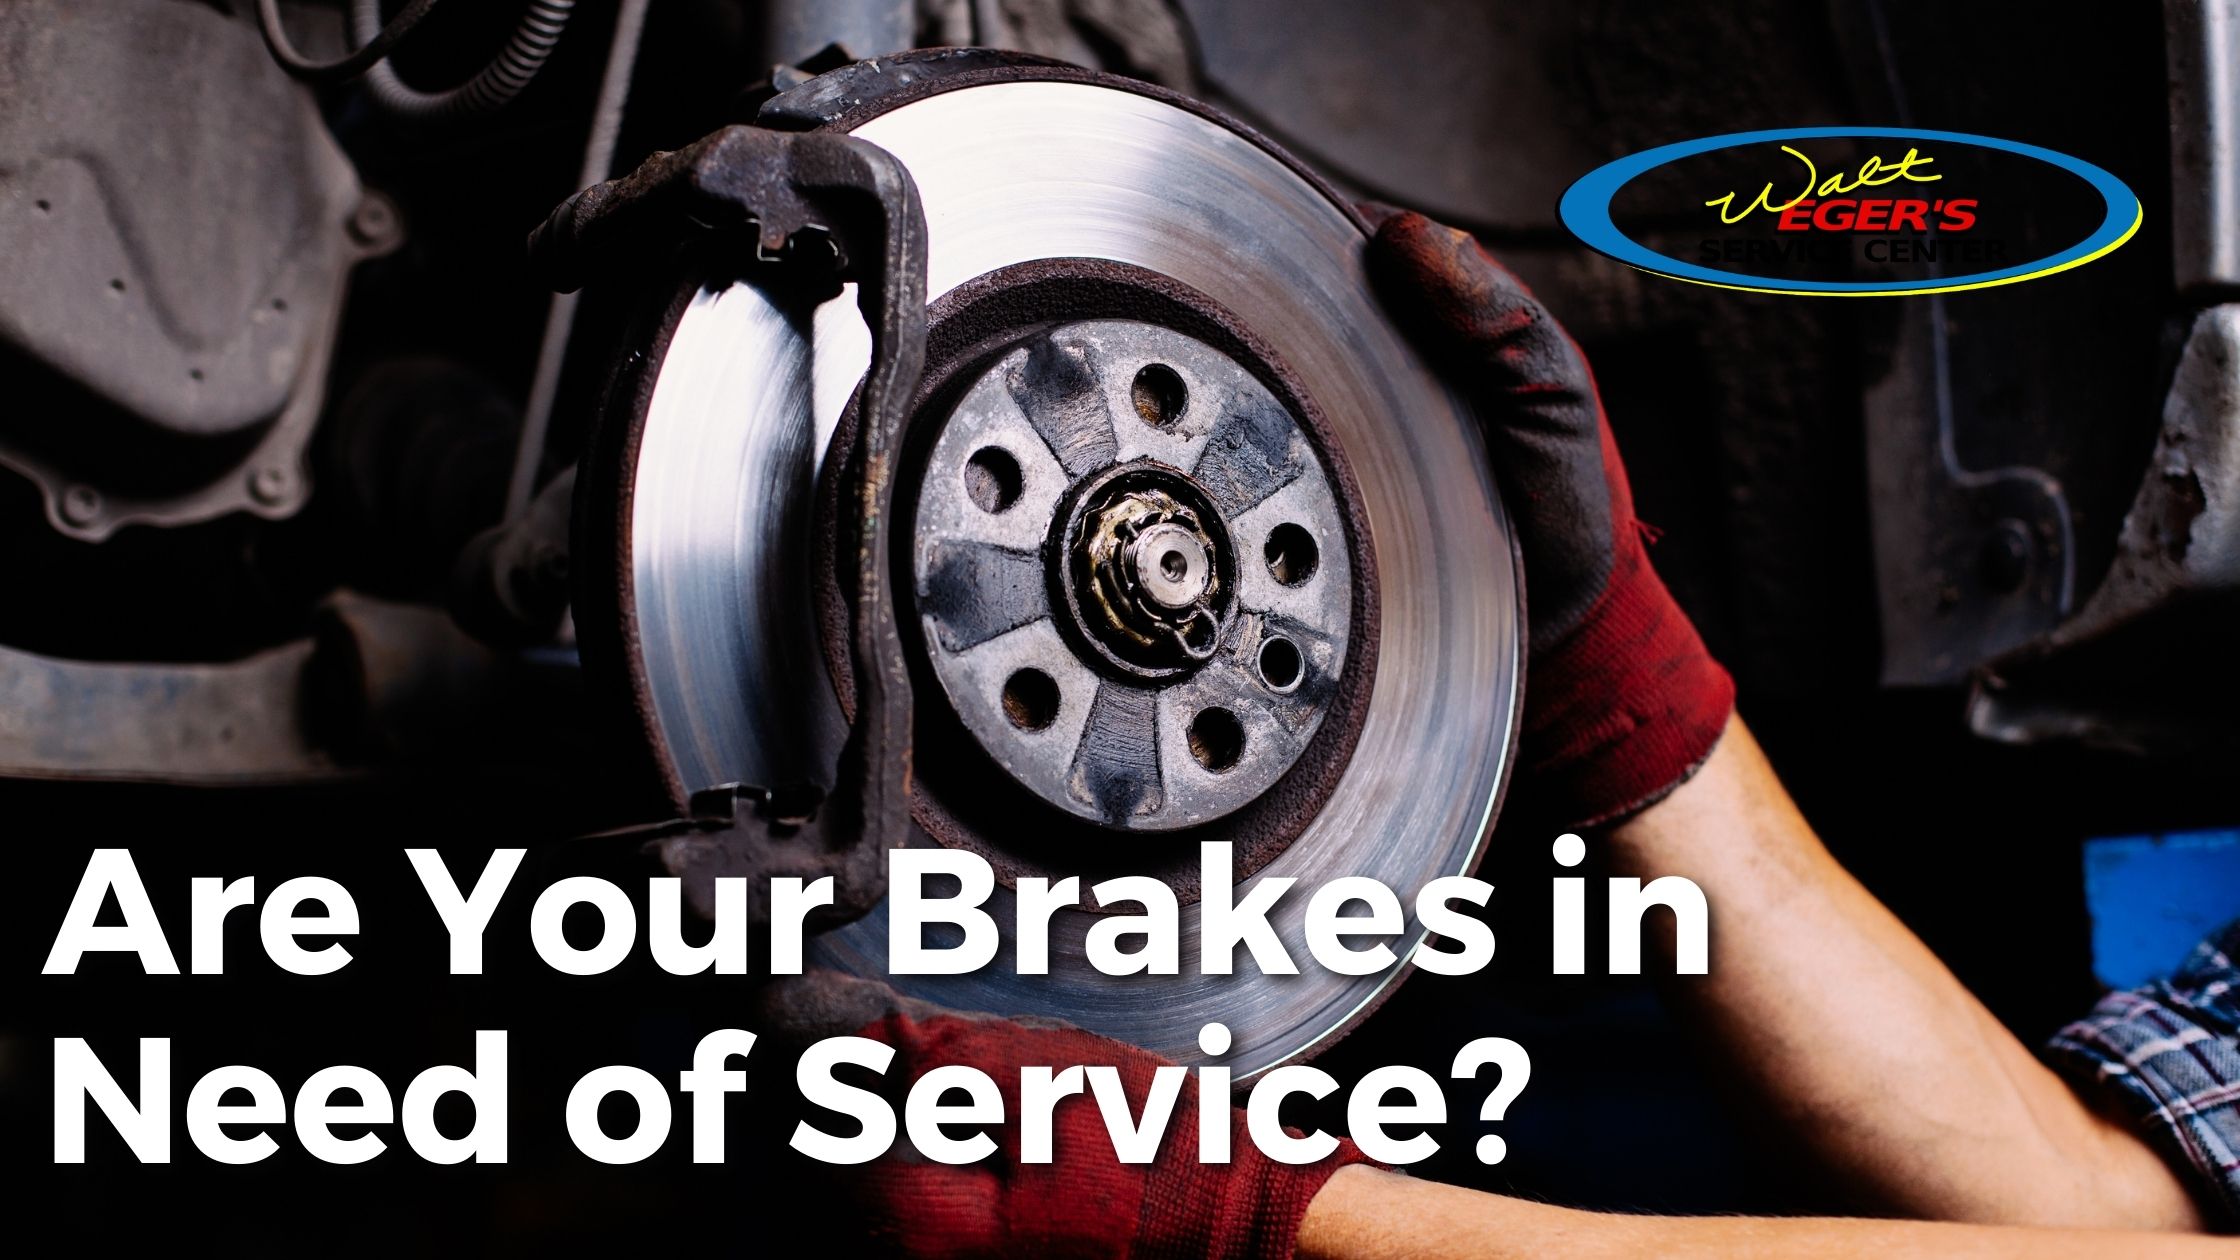 How to Tell If You Need New Brakes: Signs to Look For